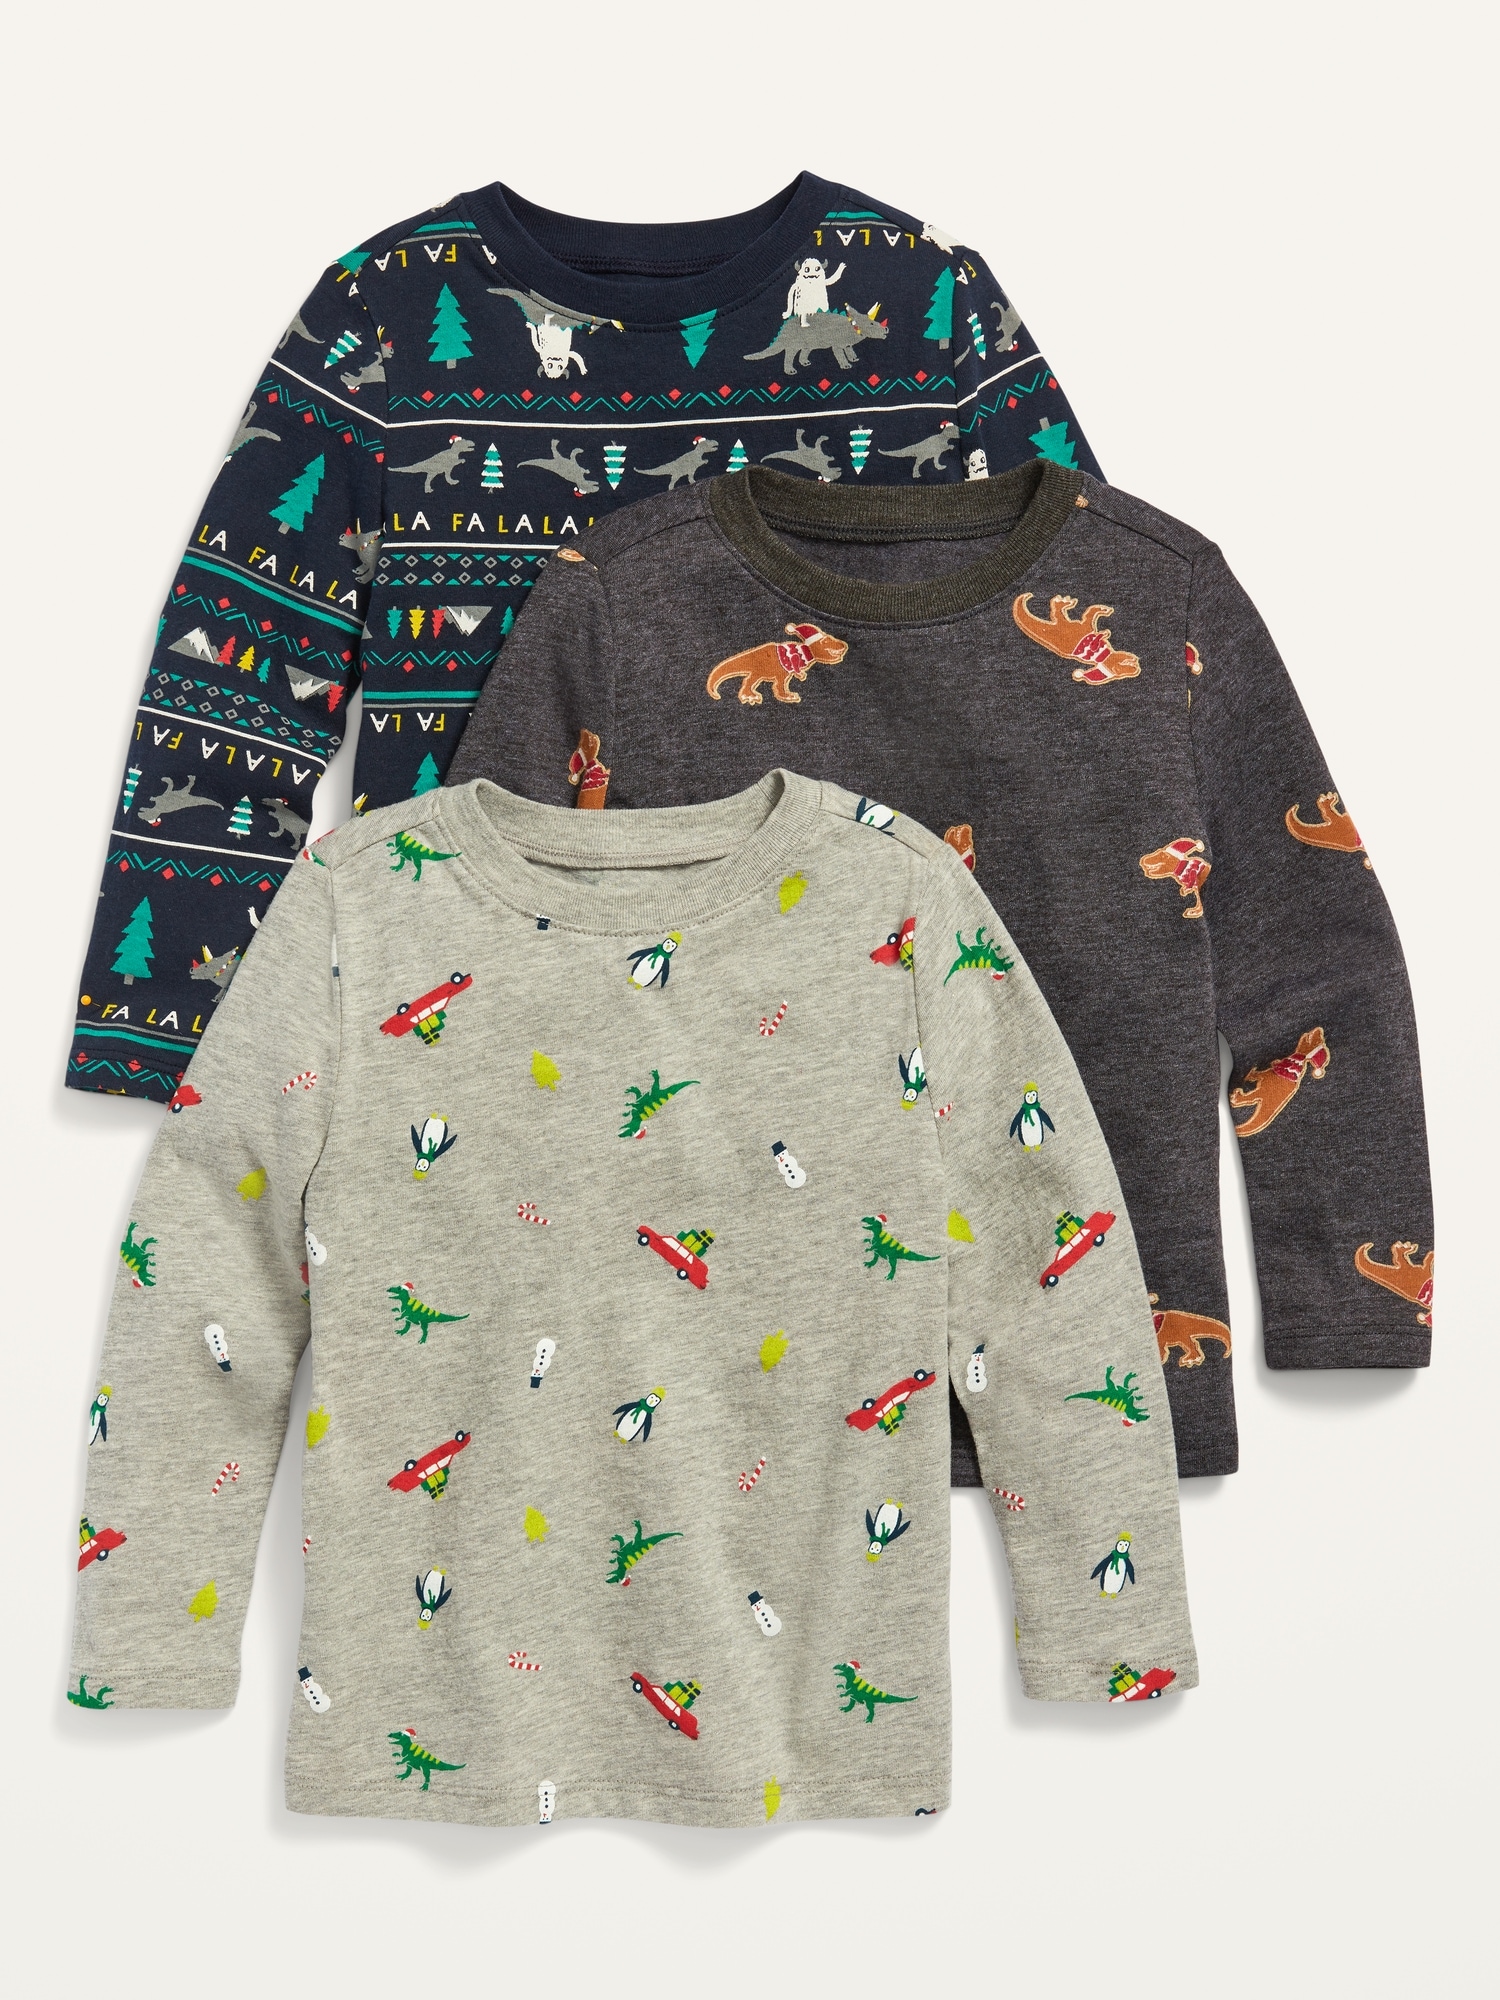 Long-Sleeve Printed Tee 3-Pack for Toddler Boys | Old Navy